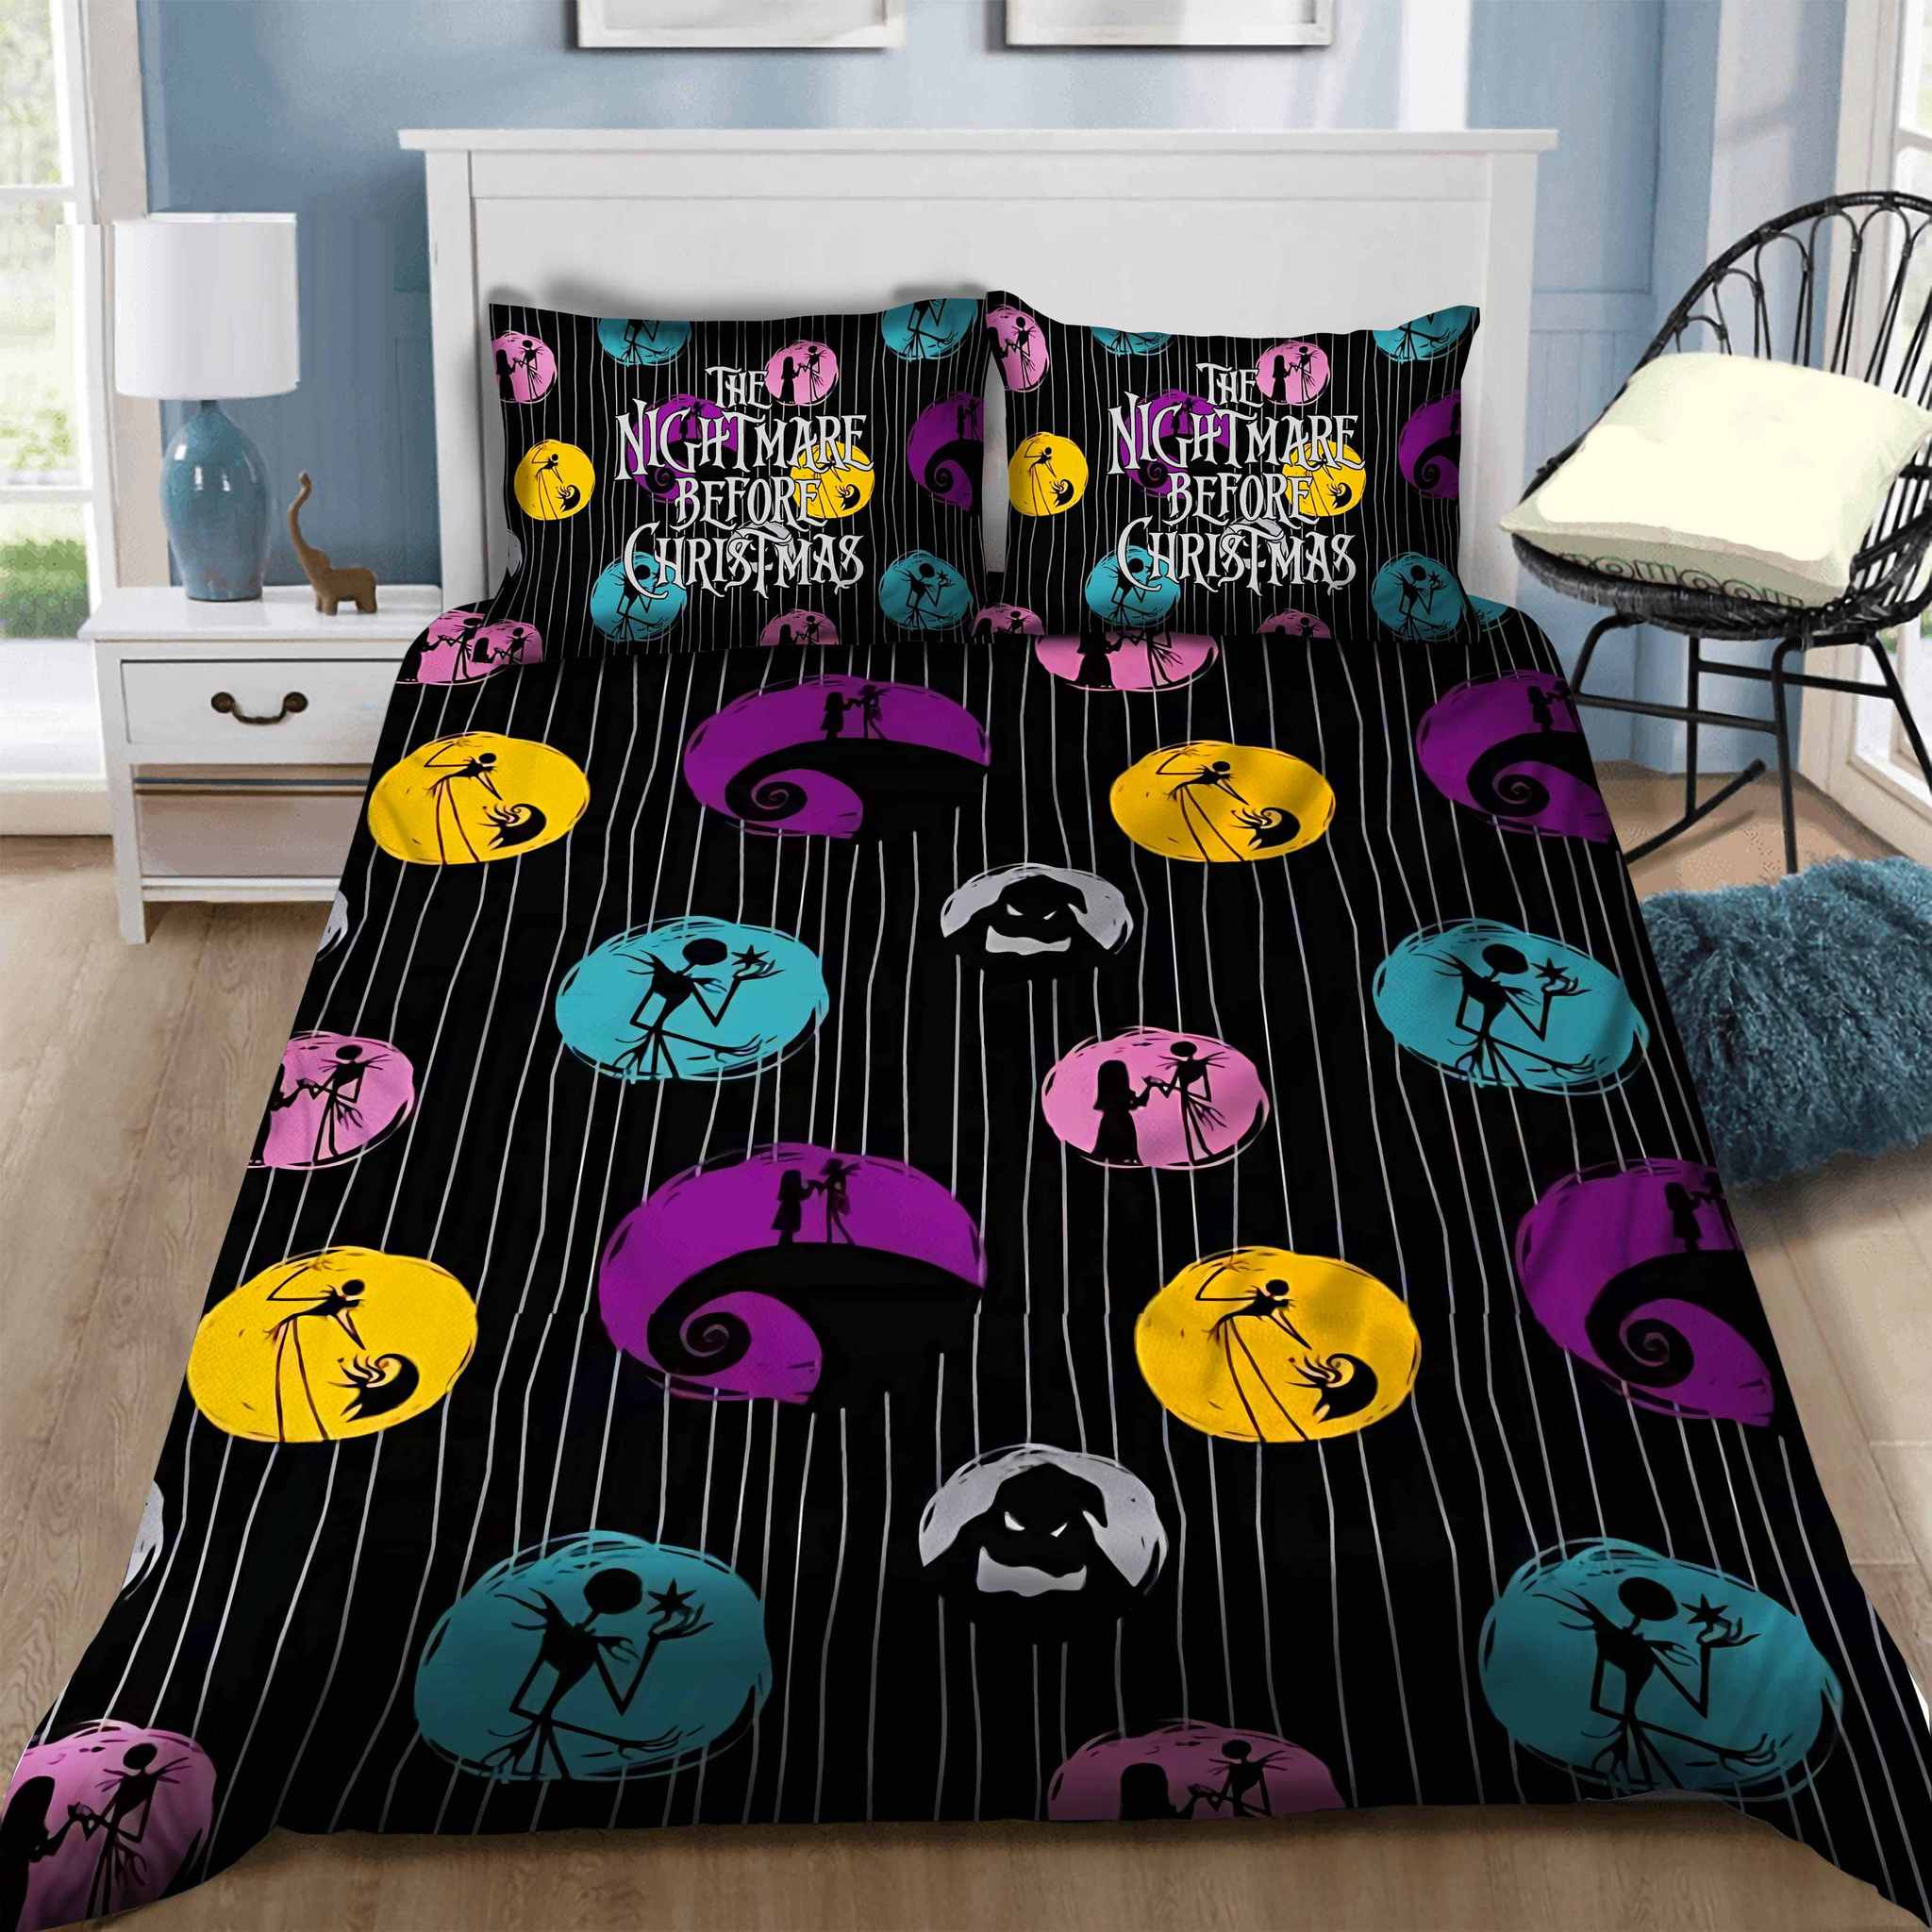 The Nightmare Before Christmas Bedding Set Duvet Cover And 2 Pillowcases